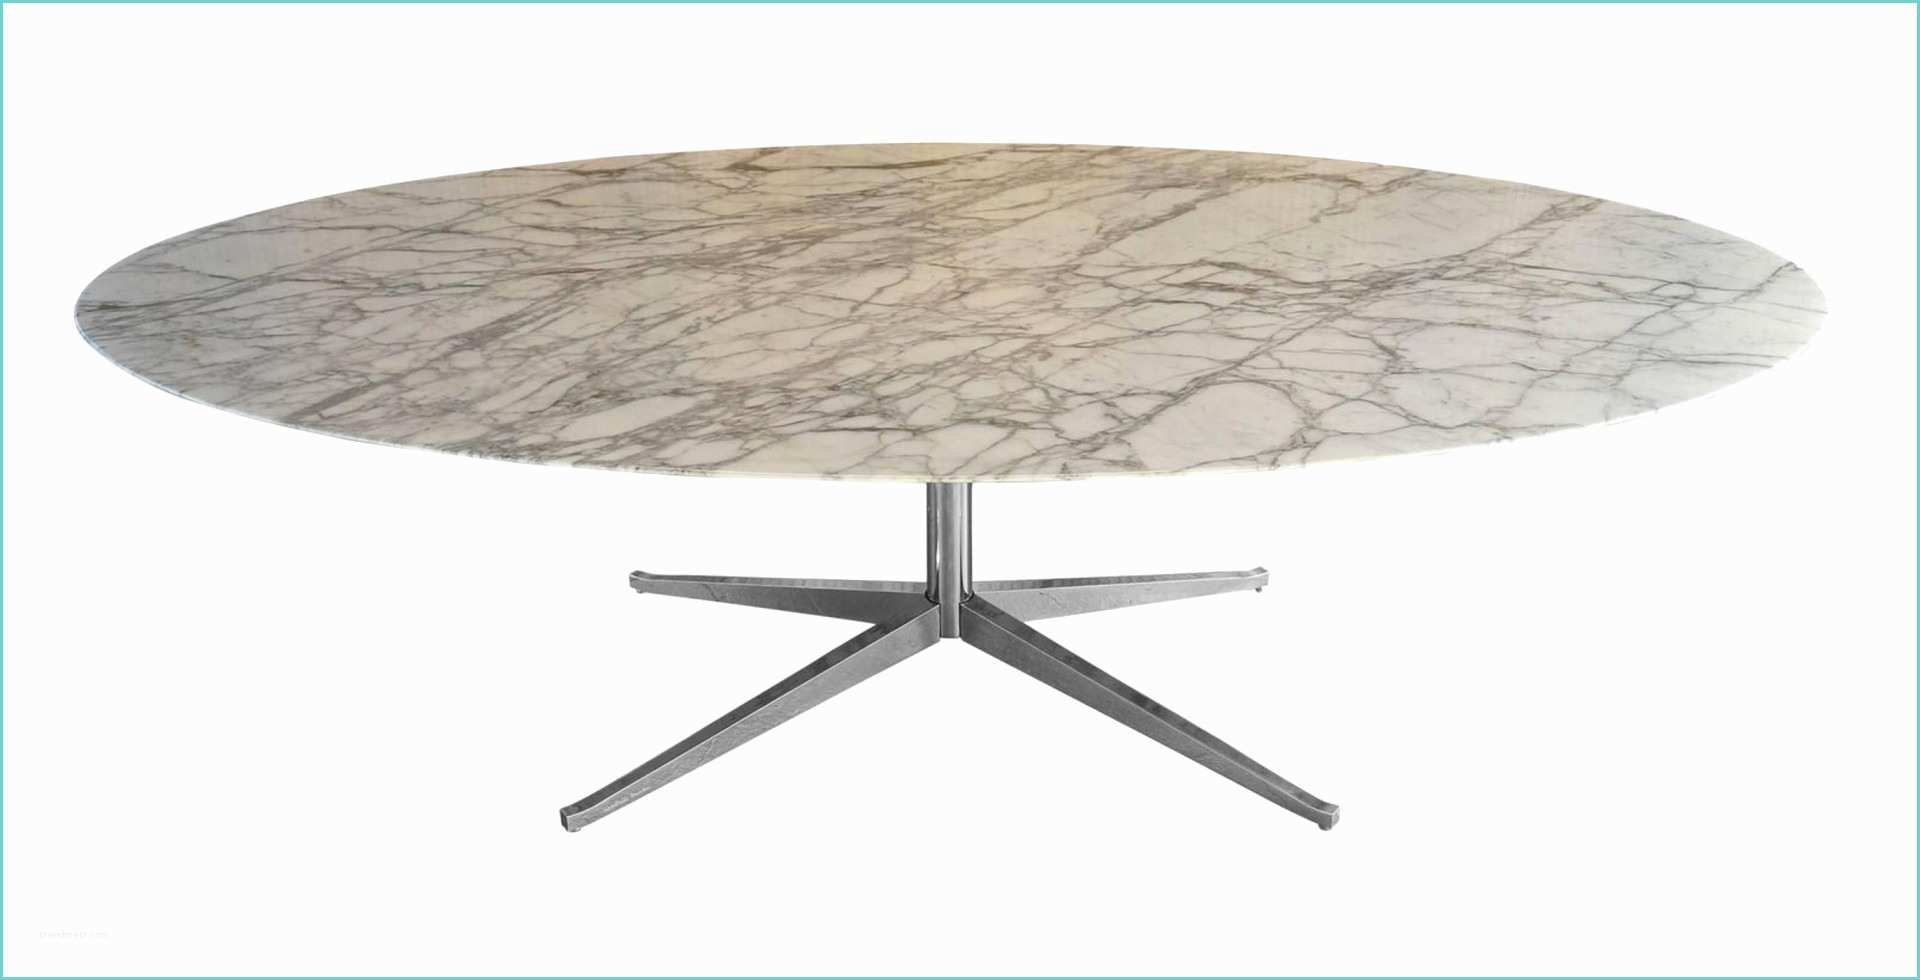 Table Knoll Ovale Occasion Table Knoll Ovale Occasion Perfect Table Knoll Ovale